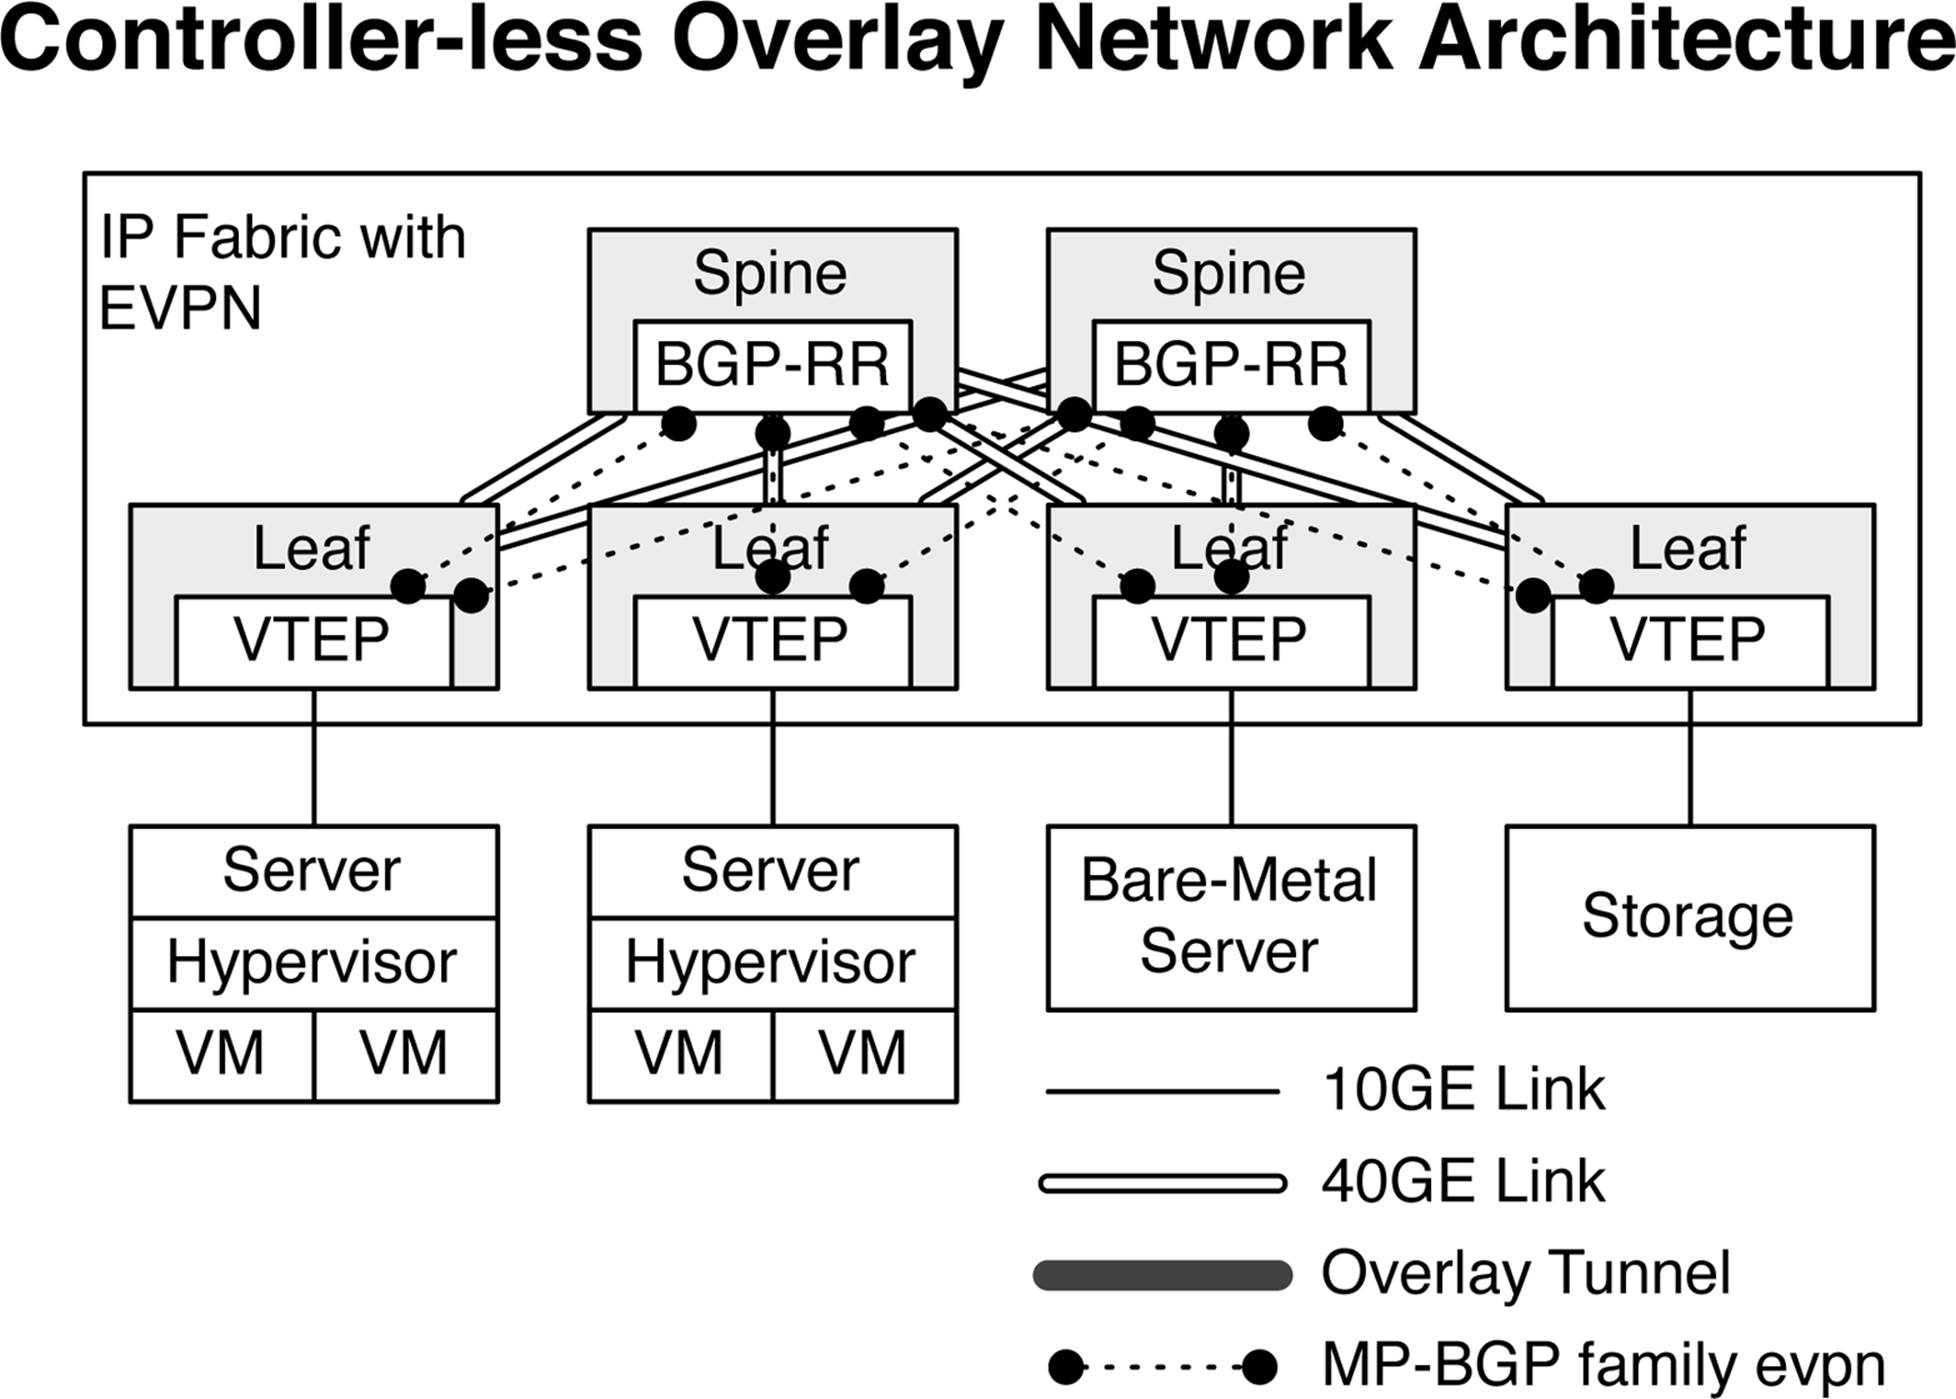 Controller-less overlay network architecture with IP Fabric and EVPN